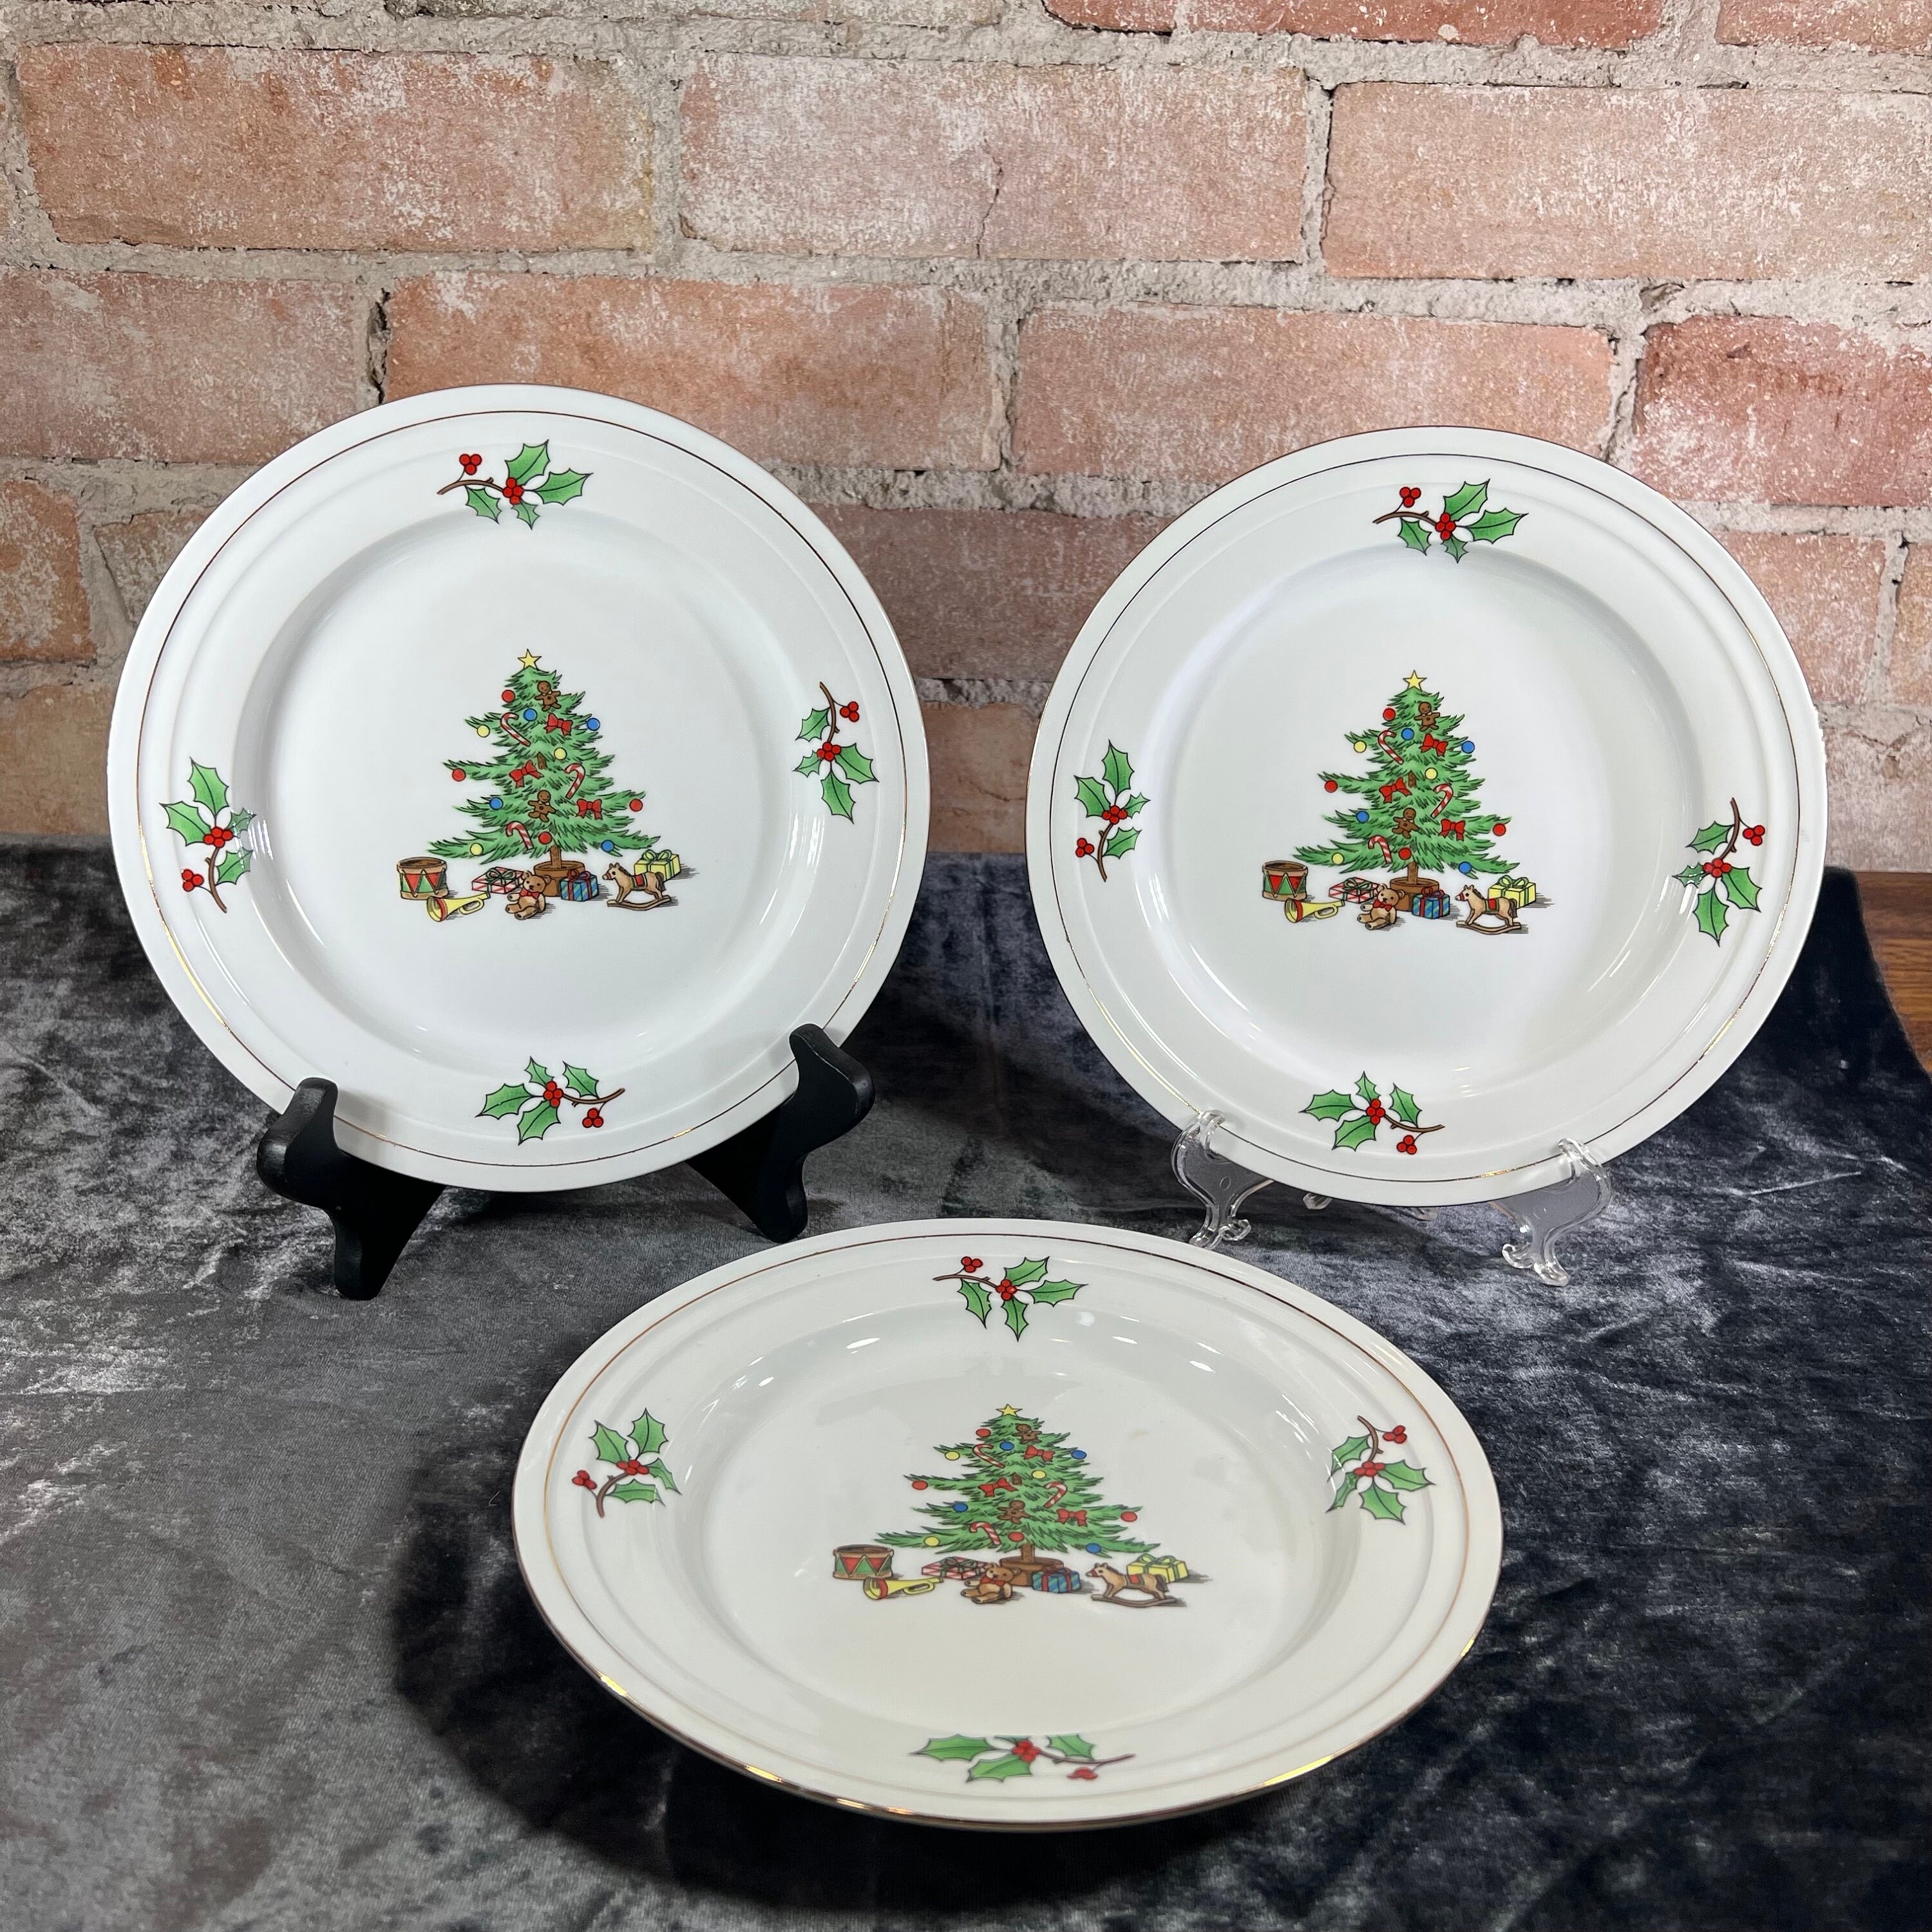 Maxcera Christmas Holiday 5 Square Dessert/Appetizer/Canape Plates Christmas Trees Set of 4 